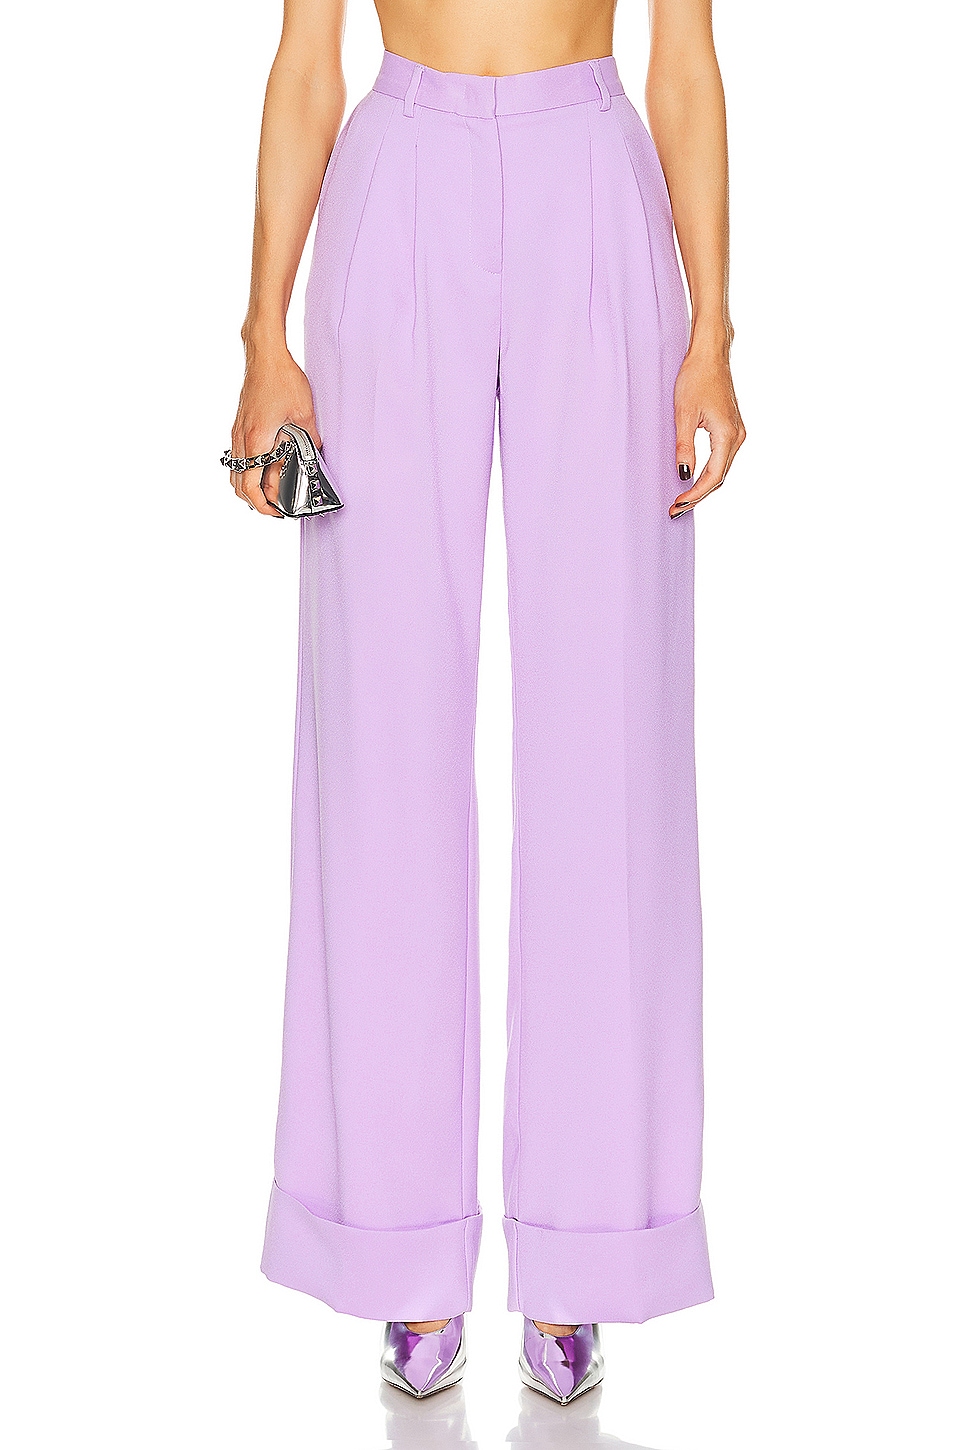 Image 1 of The Andamane Nathalie Cuffed Hem Maxi Pant in Lilac